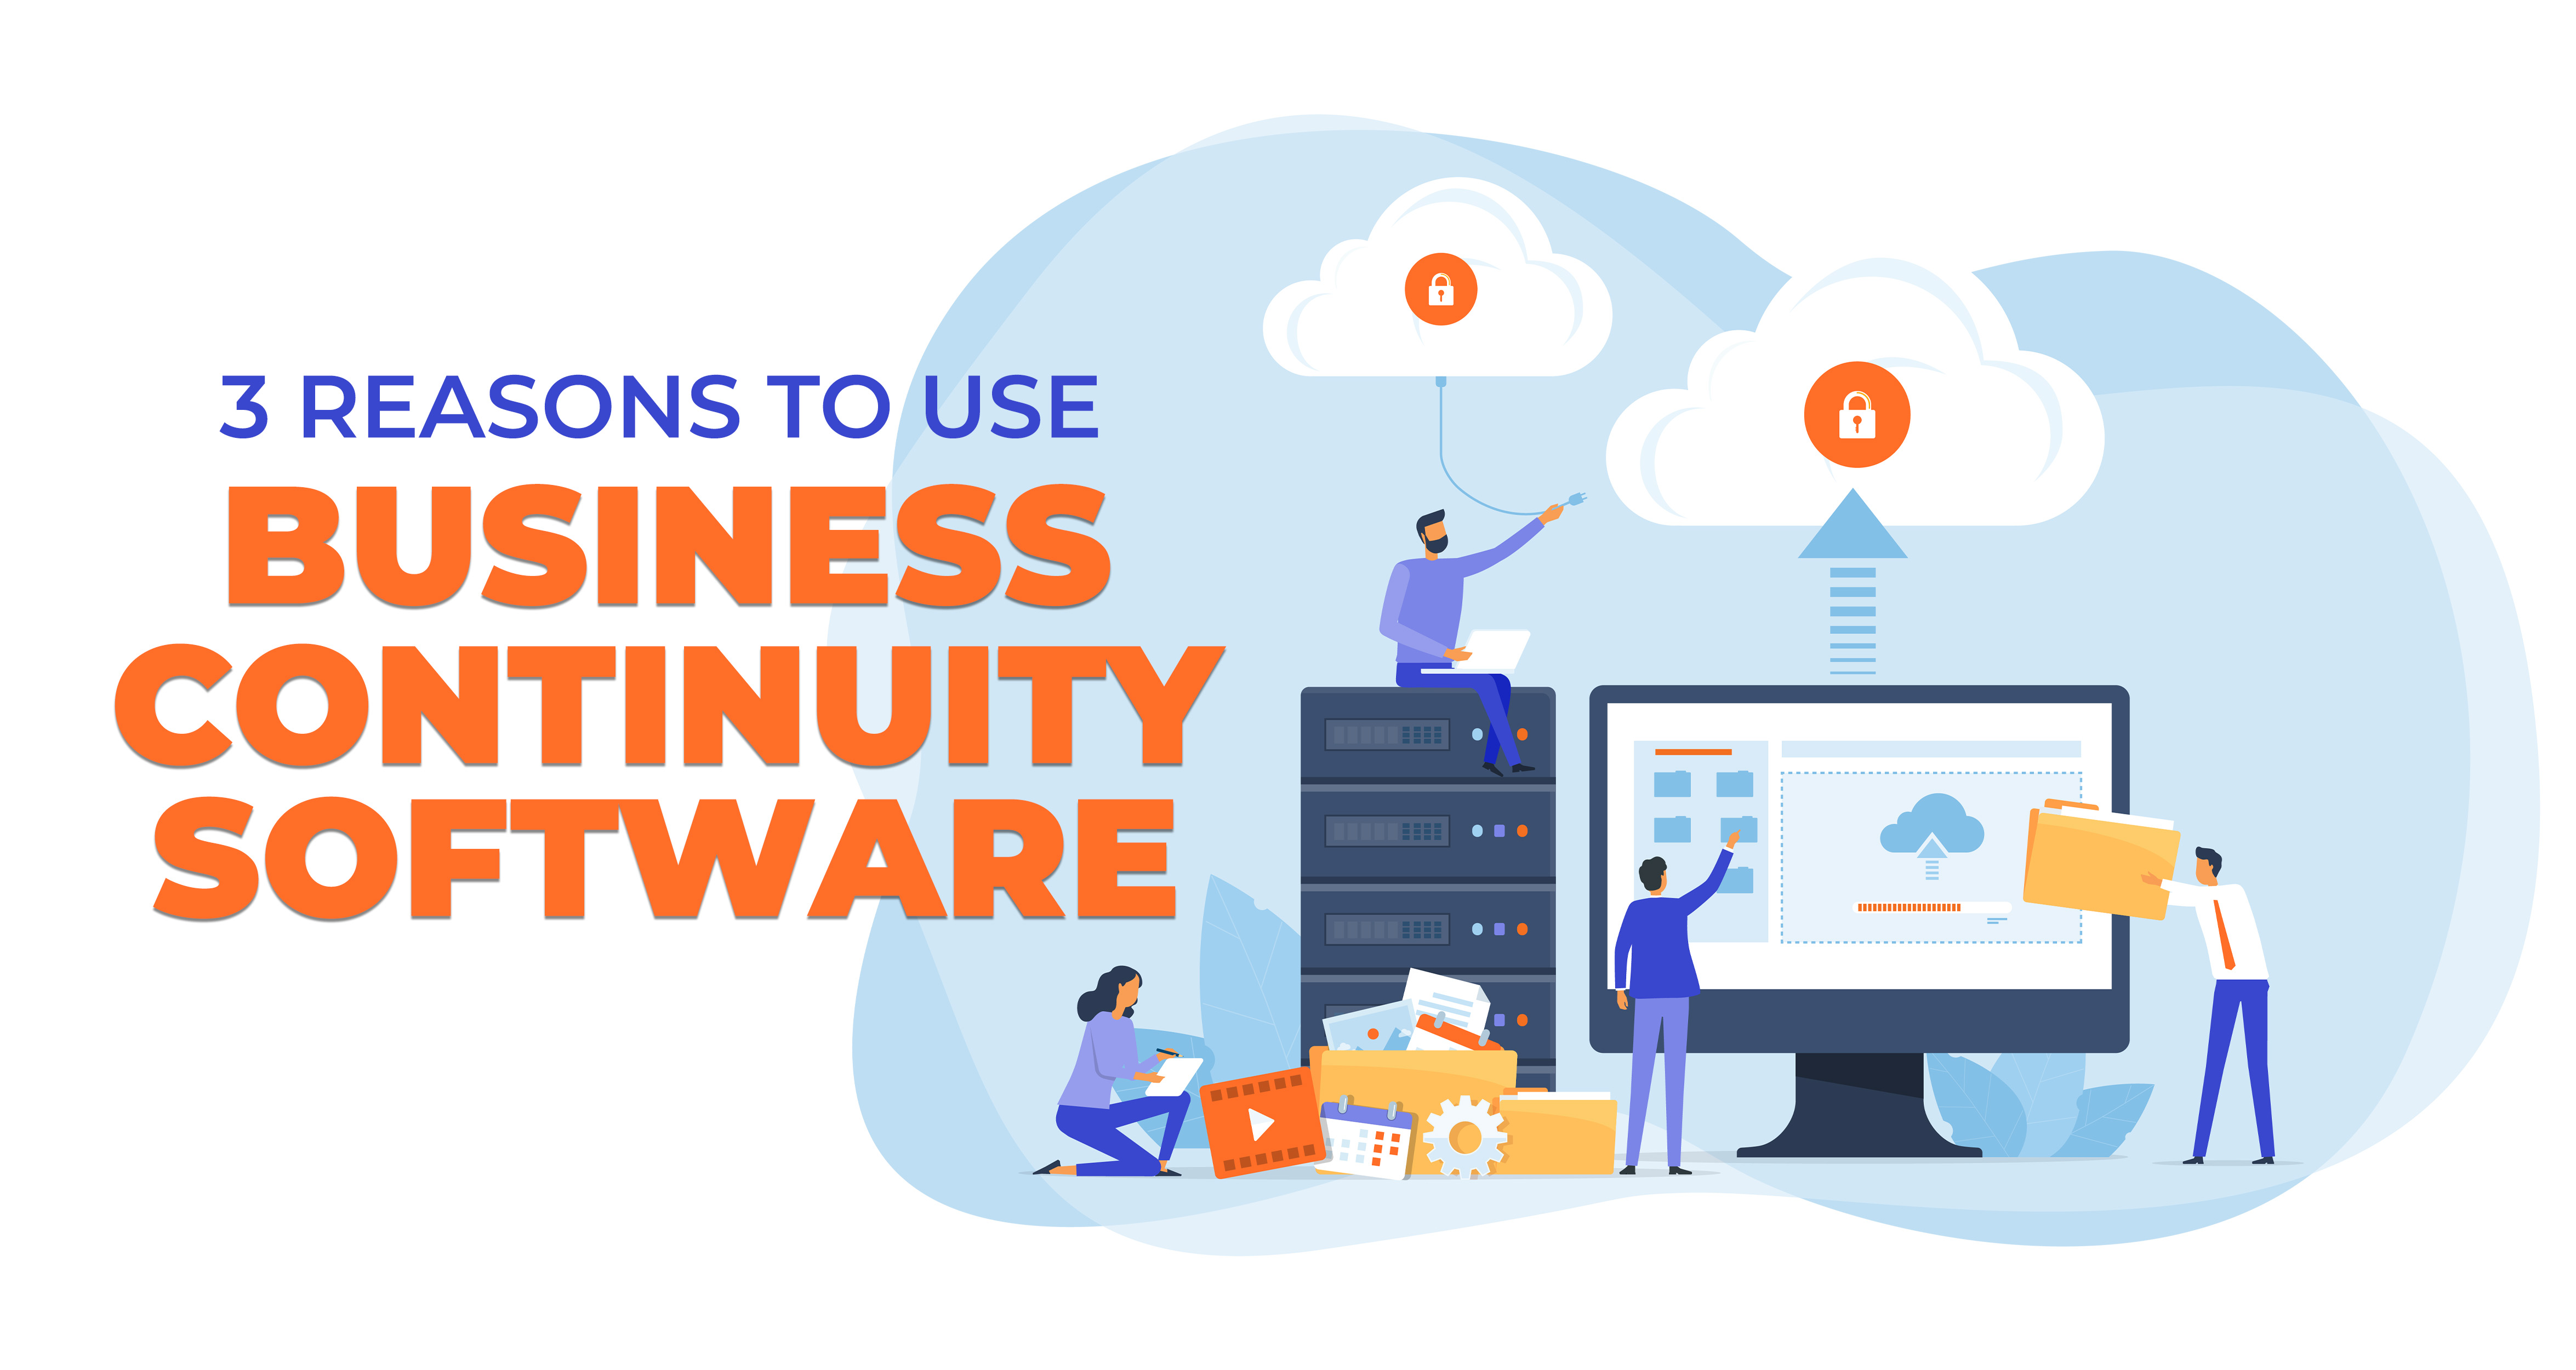 3 Reasons to Use Business Continuity Software